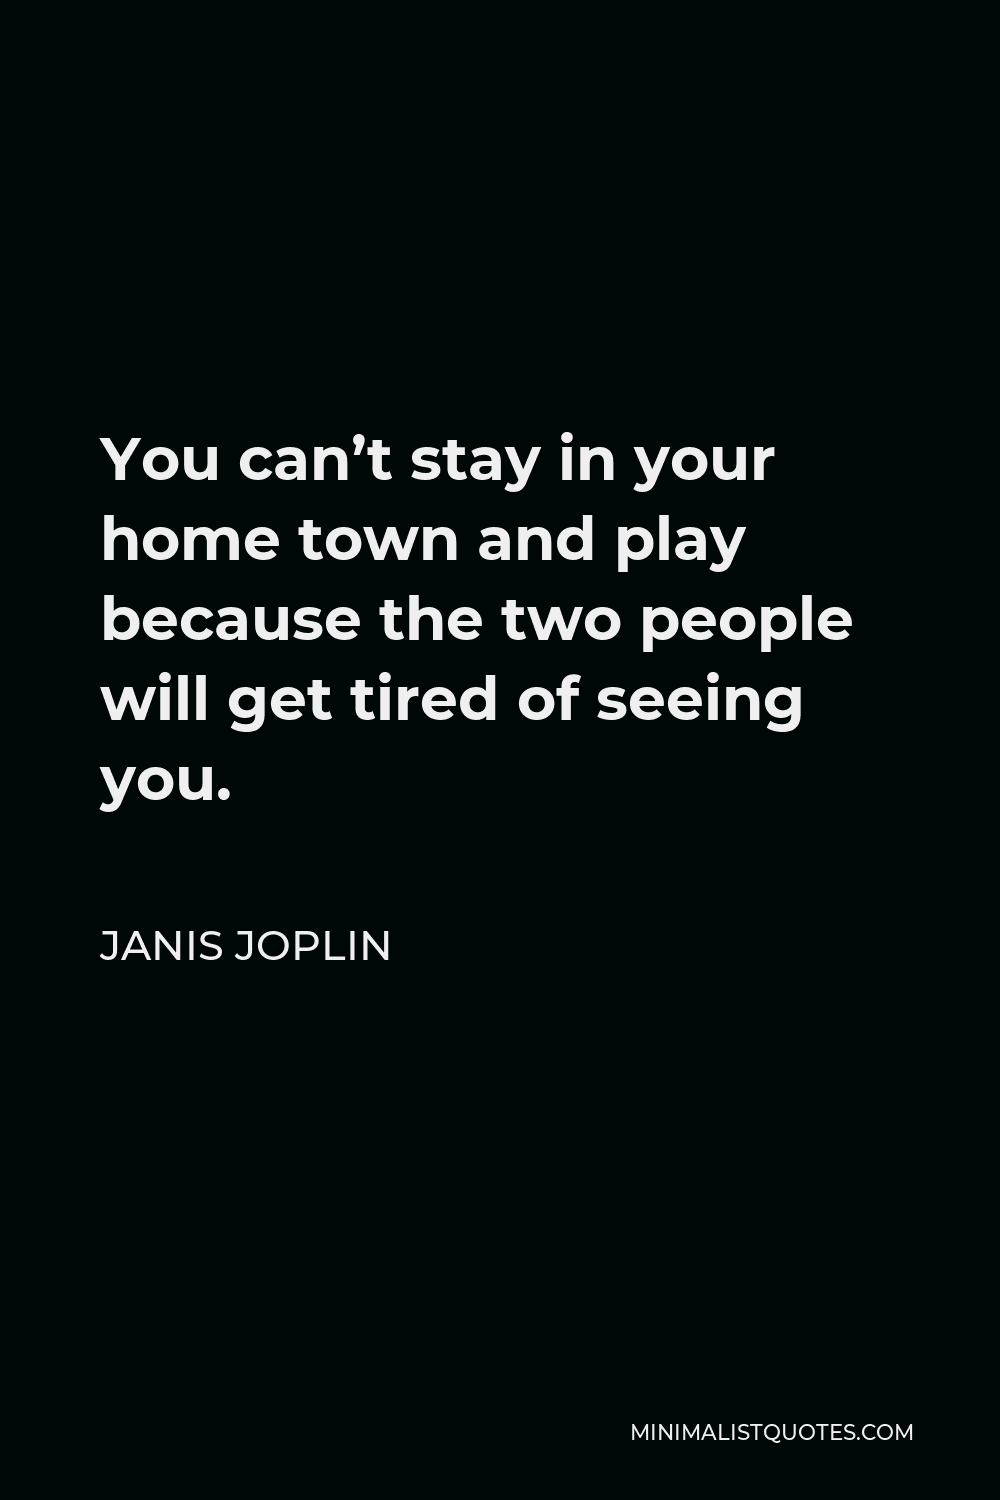 Janis Joplin Quote - You can’t stay in your home town and play because the two people will get tired of seeing you.